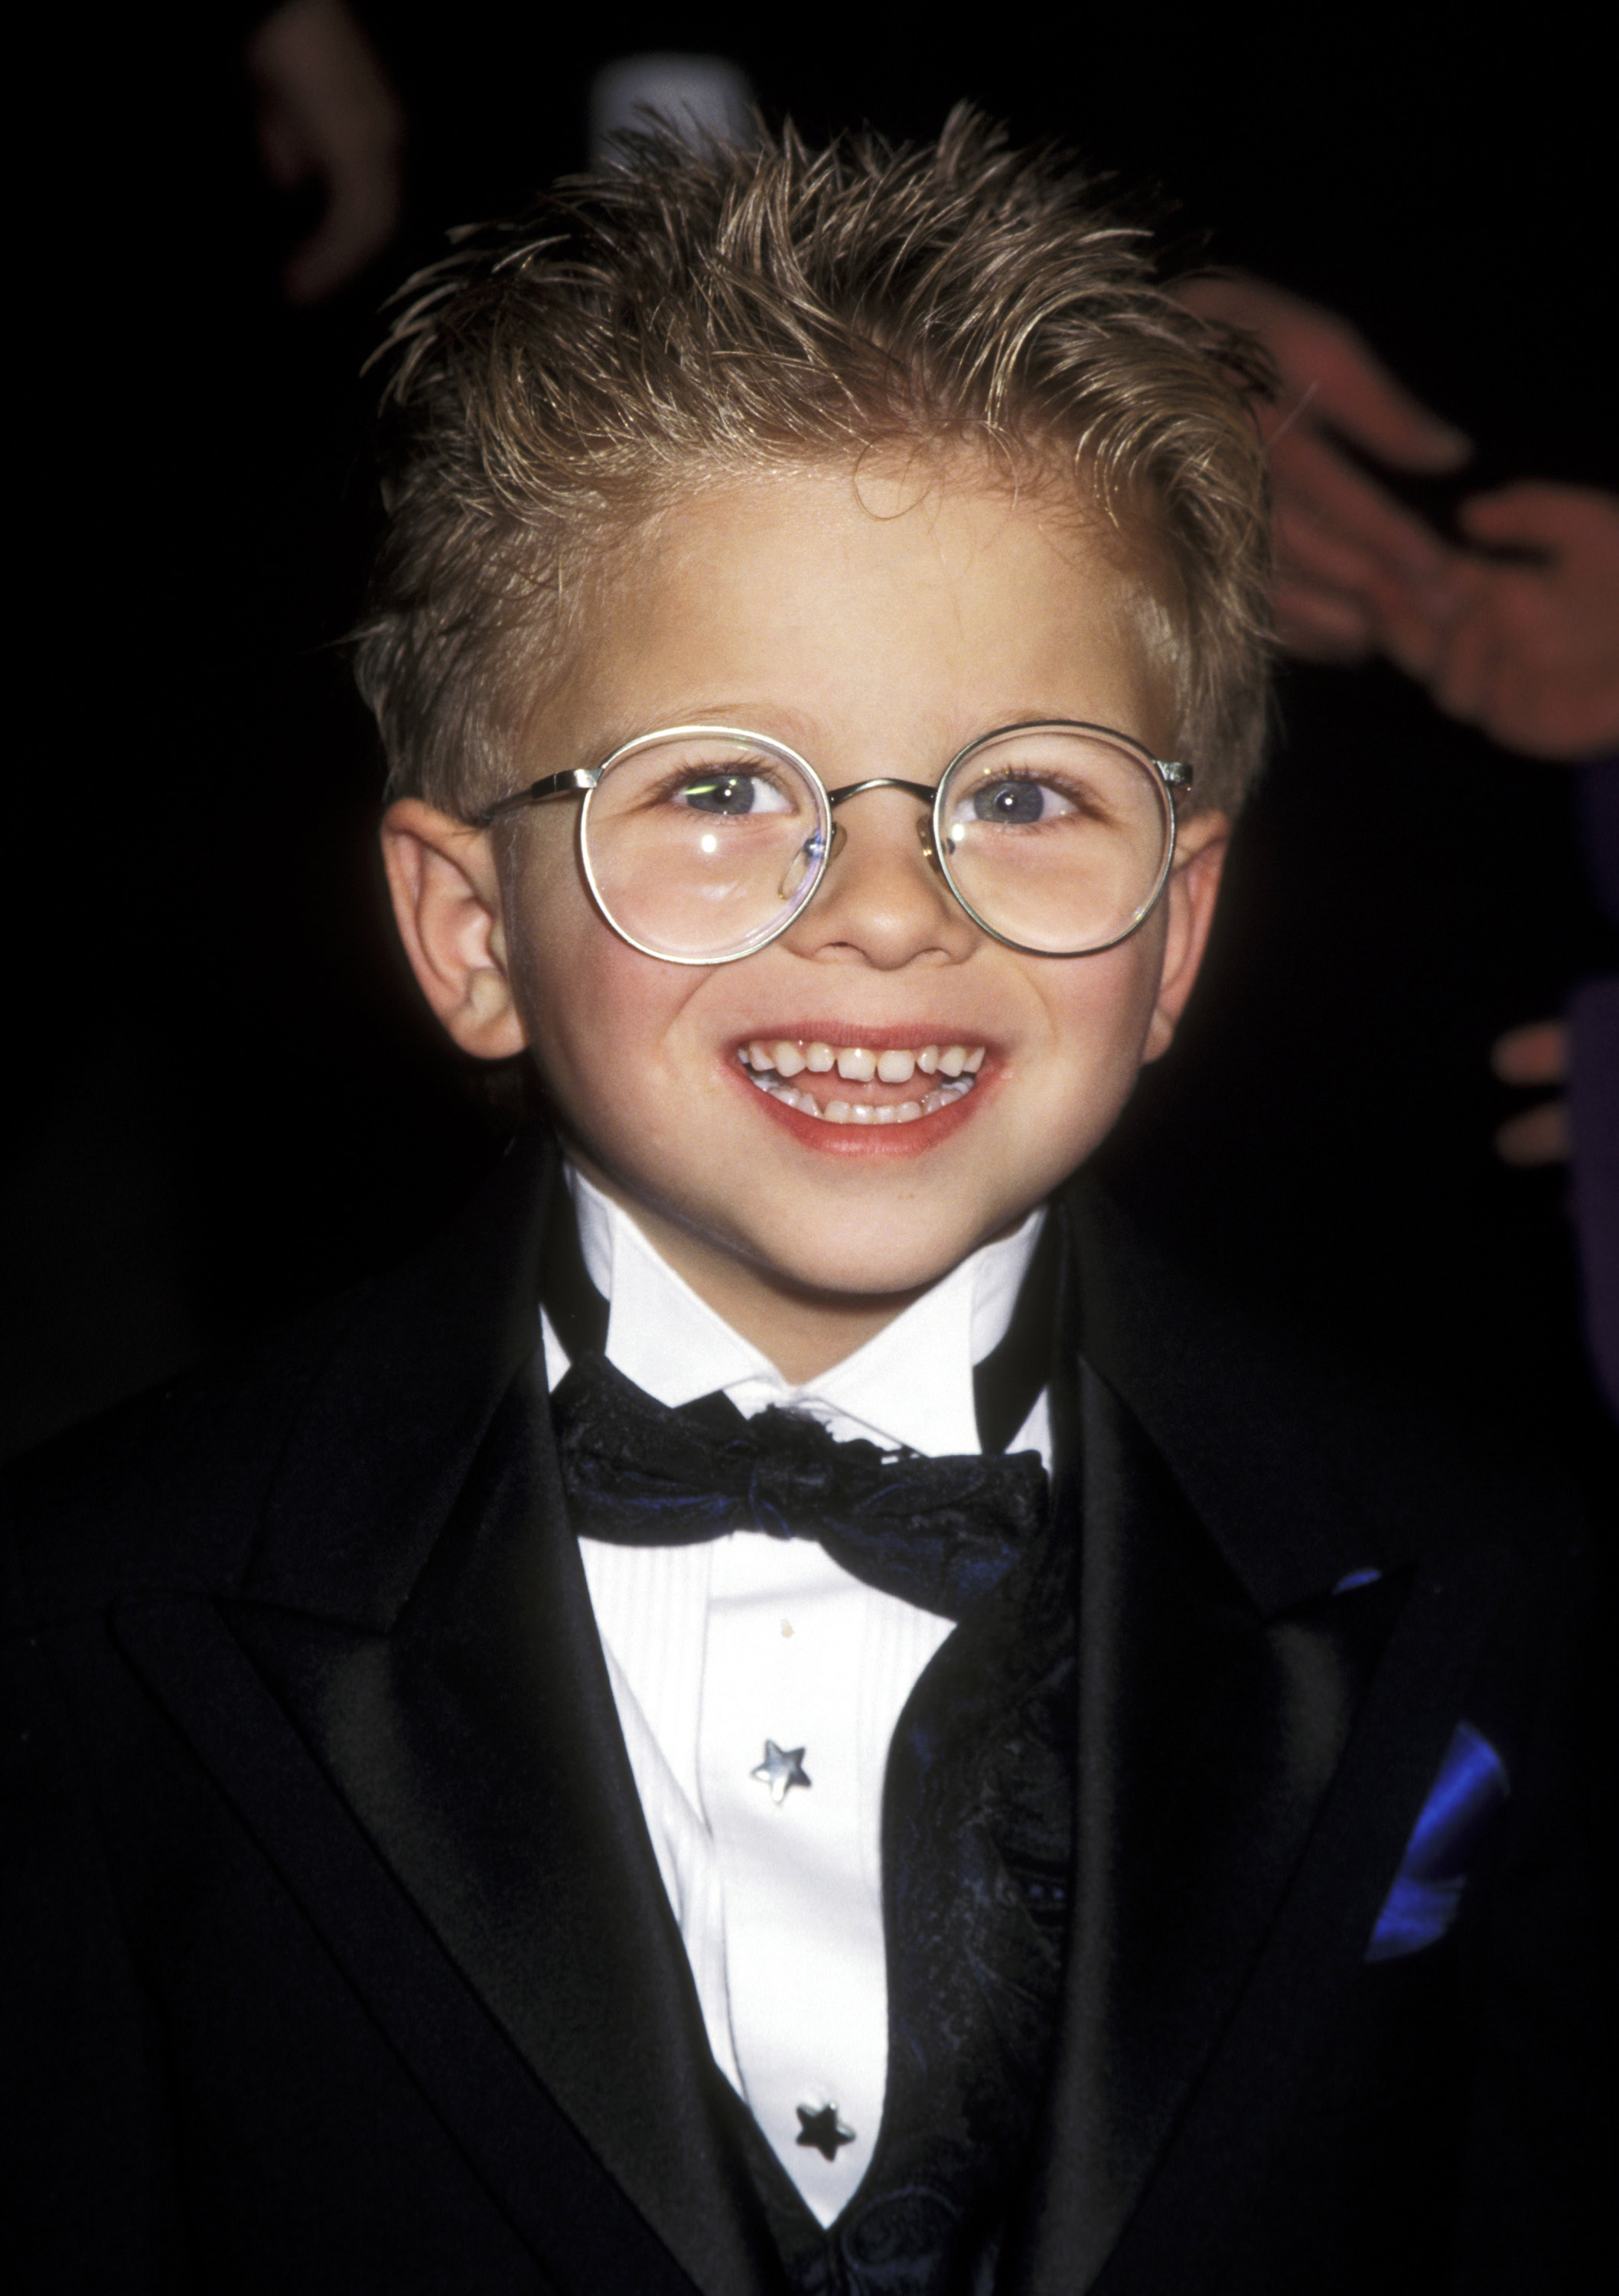 The child actor in 1997 | Source: Getty Images